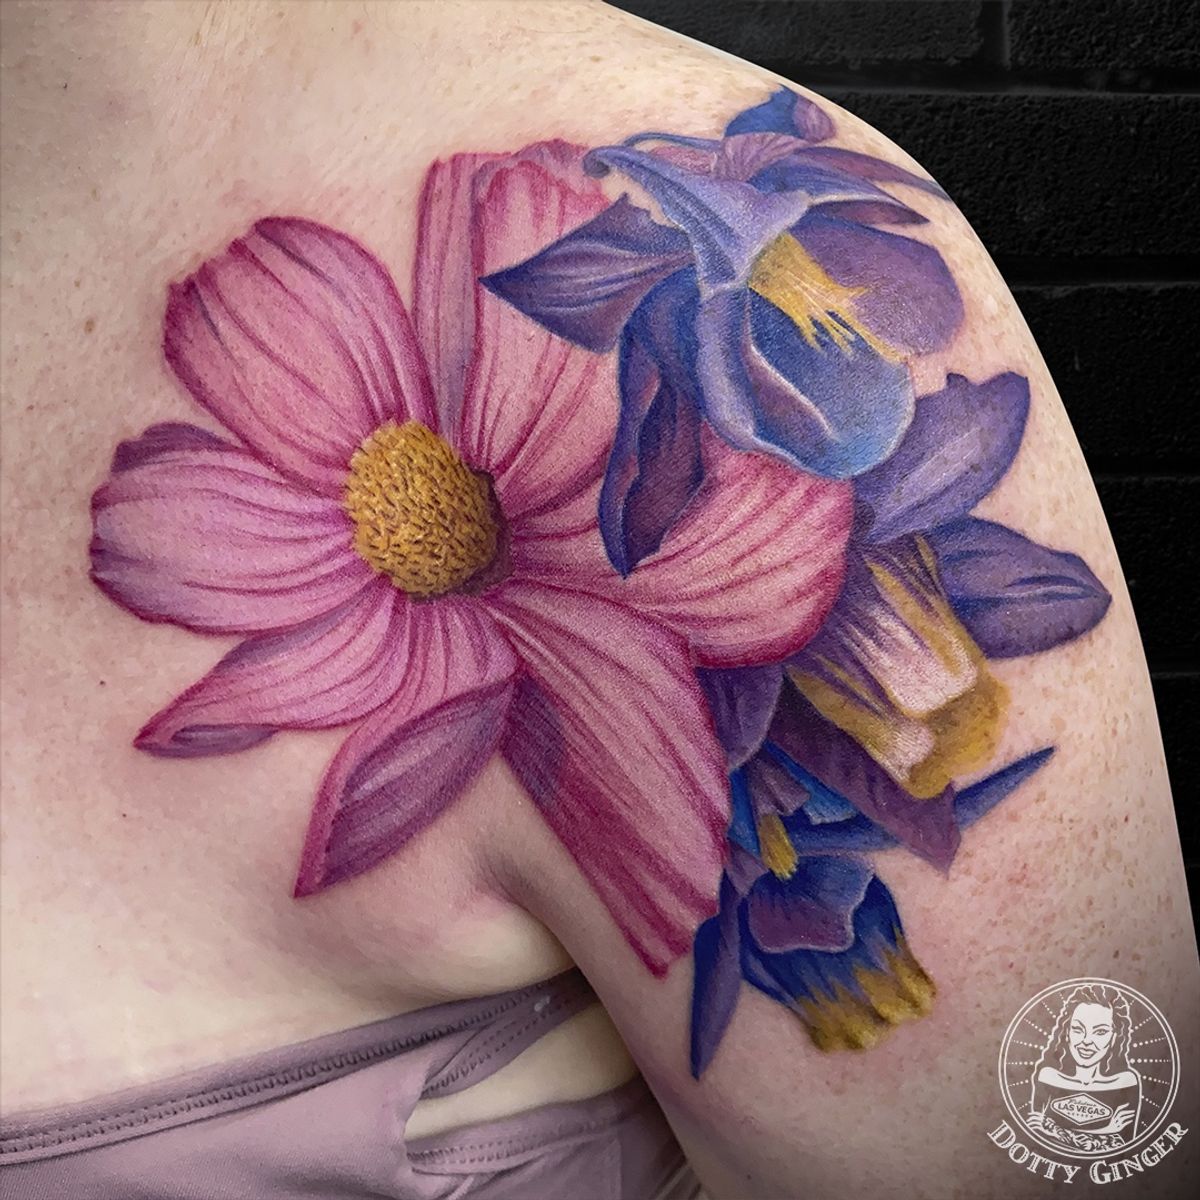 Tattoo uploaded by Dotty Ginger • Colorful daisies • Tattoodo